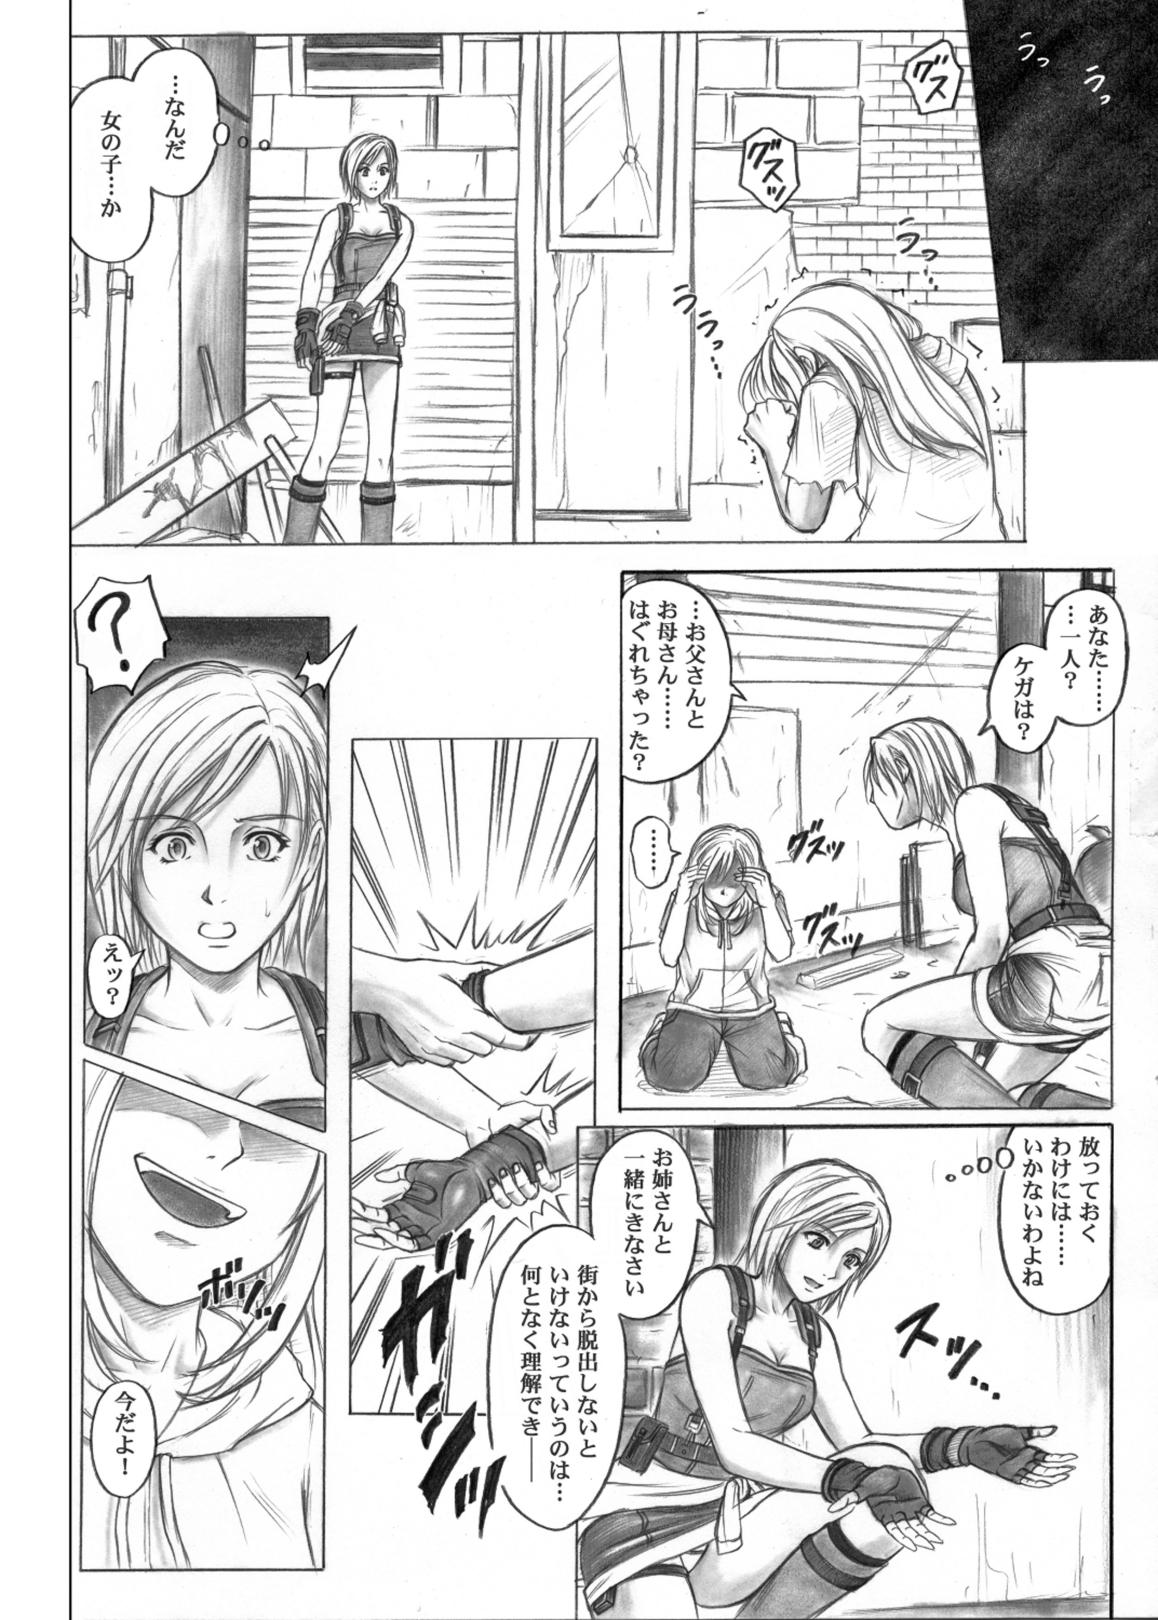 Amazing Monroeville - Resident evil 3way - Page 3